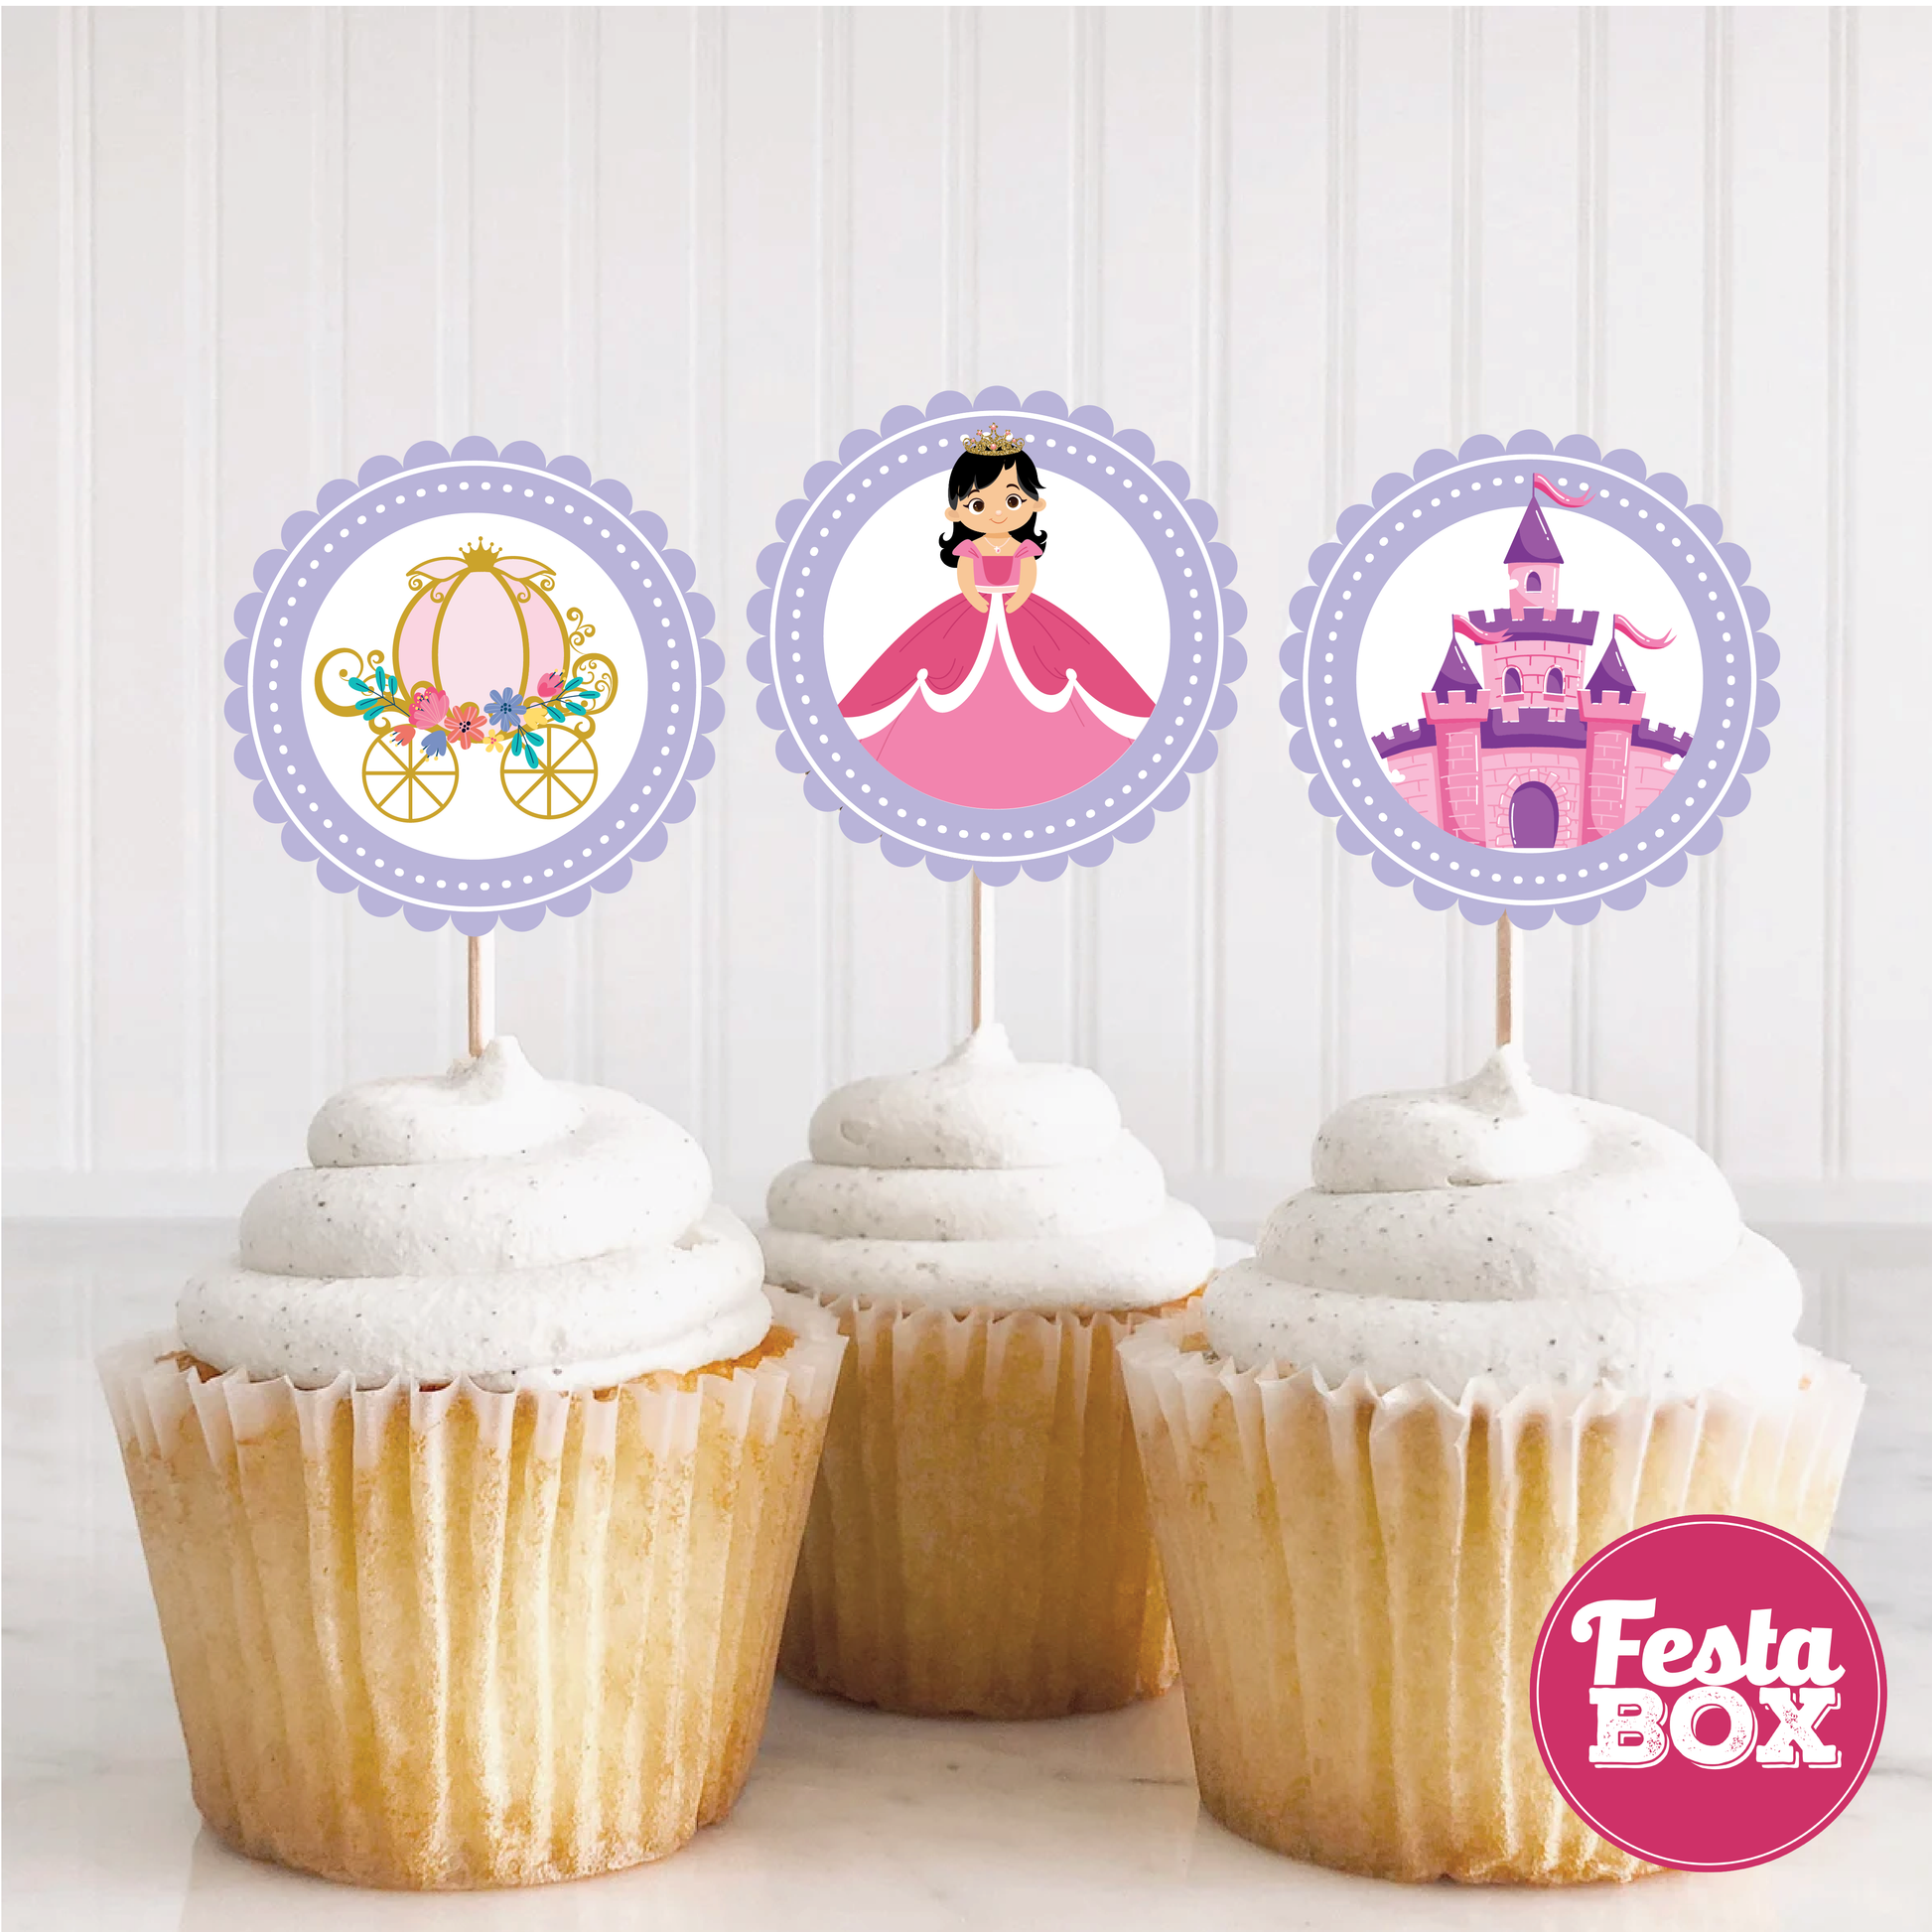 Cupcake Topper for Birthday Party Decoration - Princess Theme (Set of 6) - Assorted Option 2